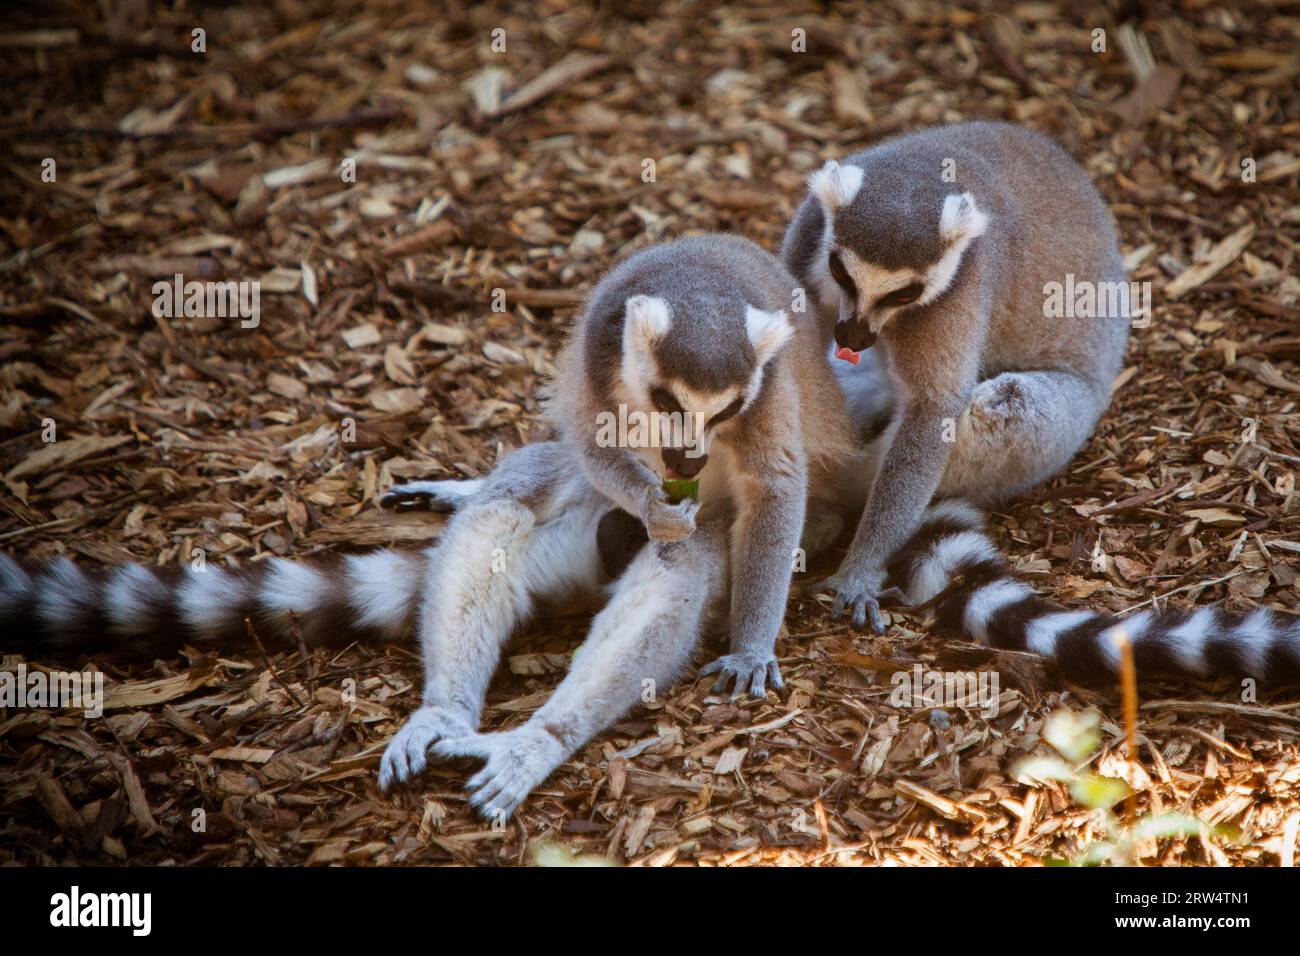 Ring-tailed lemurs sit on the ground eating Stock Photo